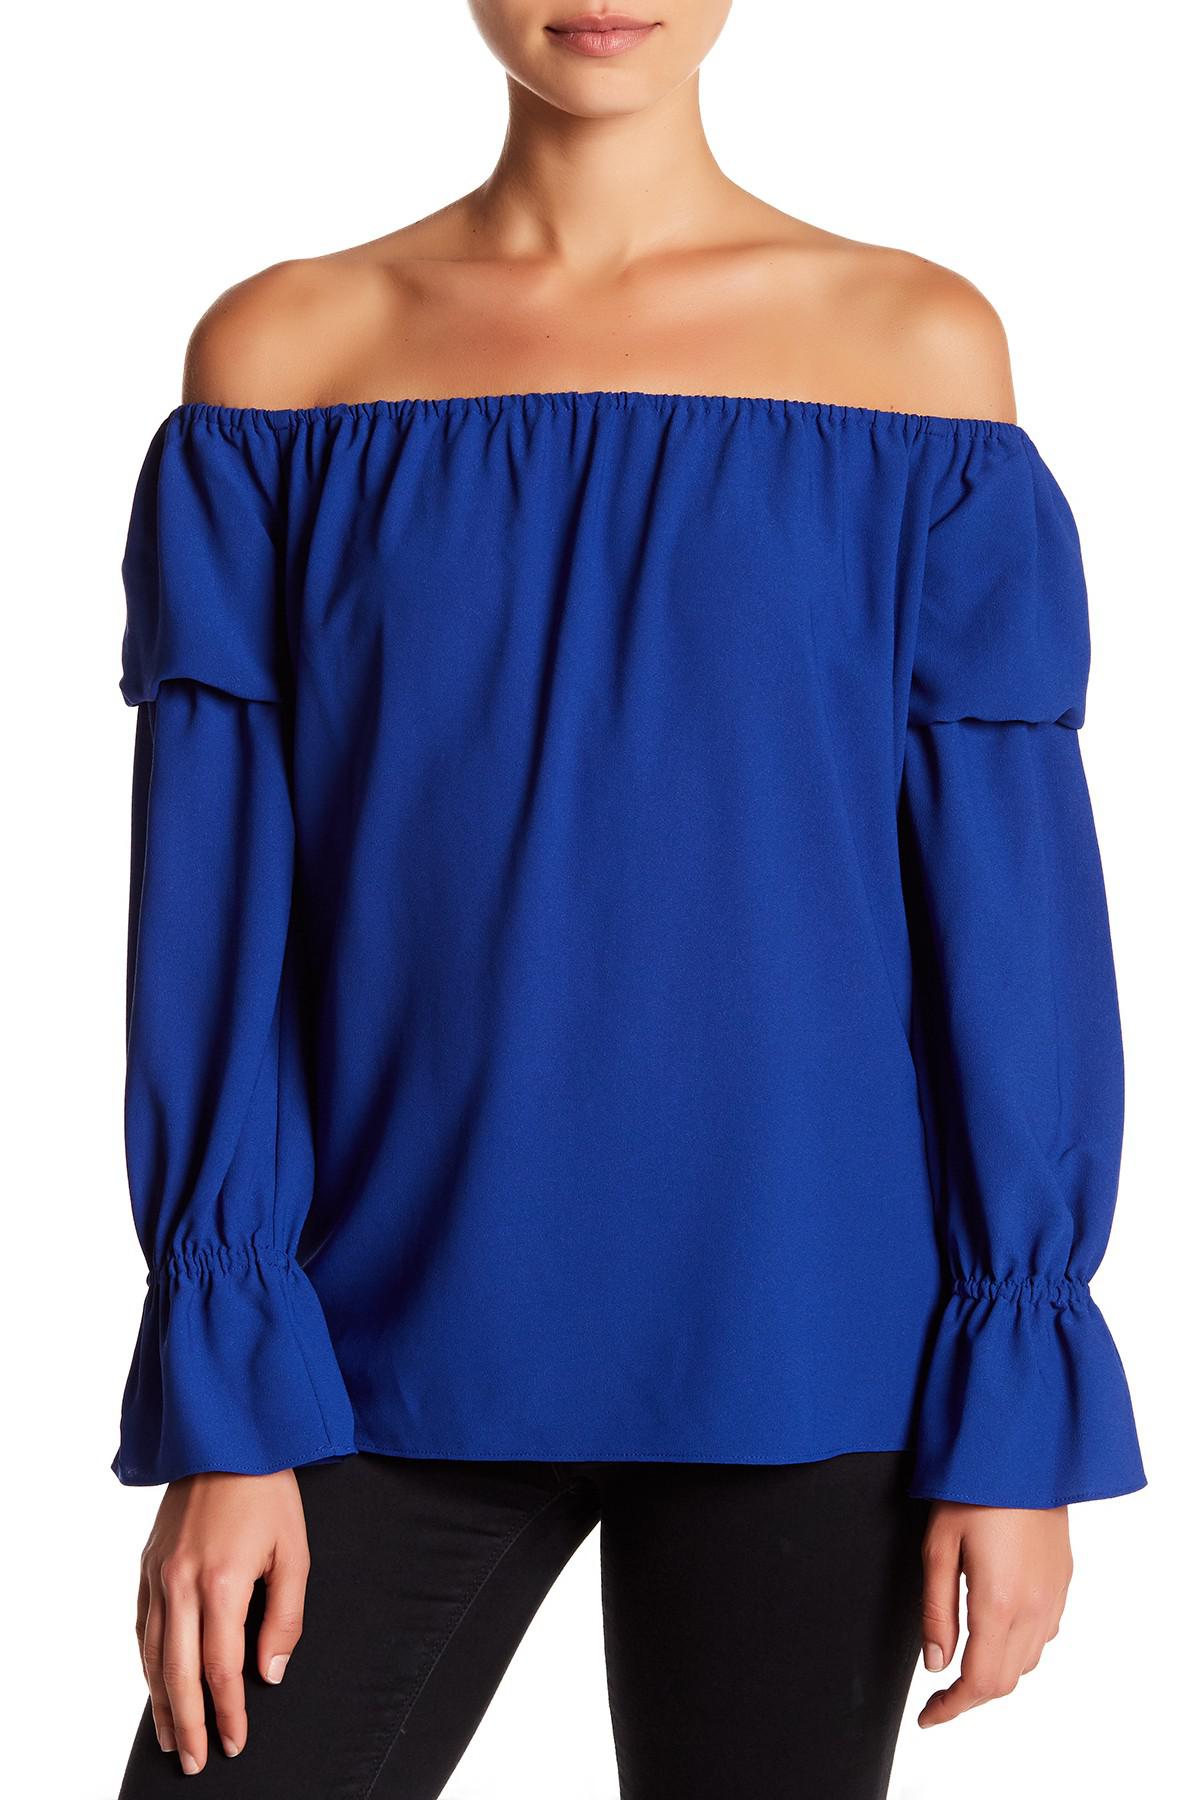 Lyst - Nicole Miller Off-the-shoulder Solid Blouse in Blue